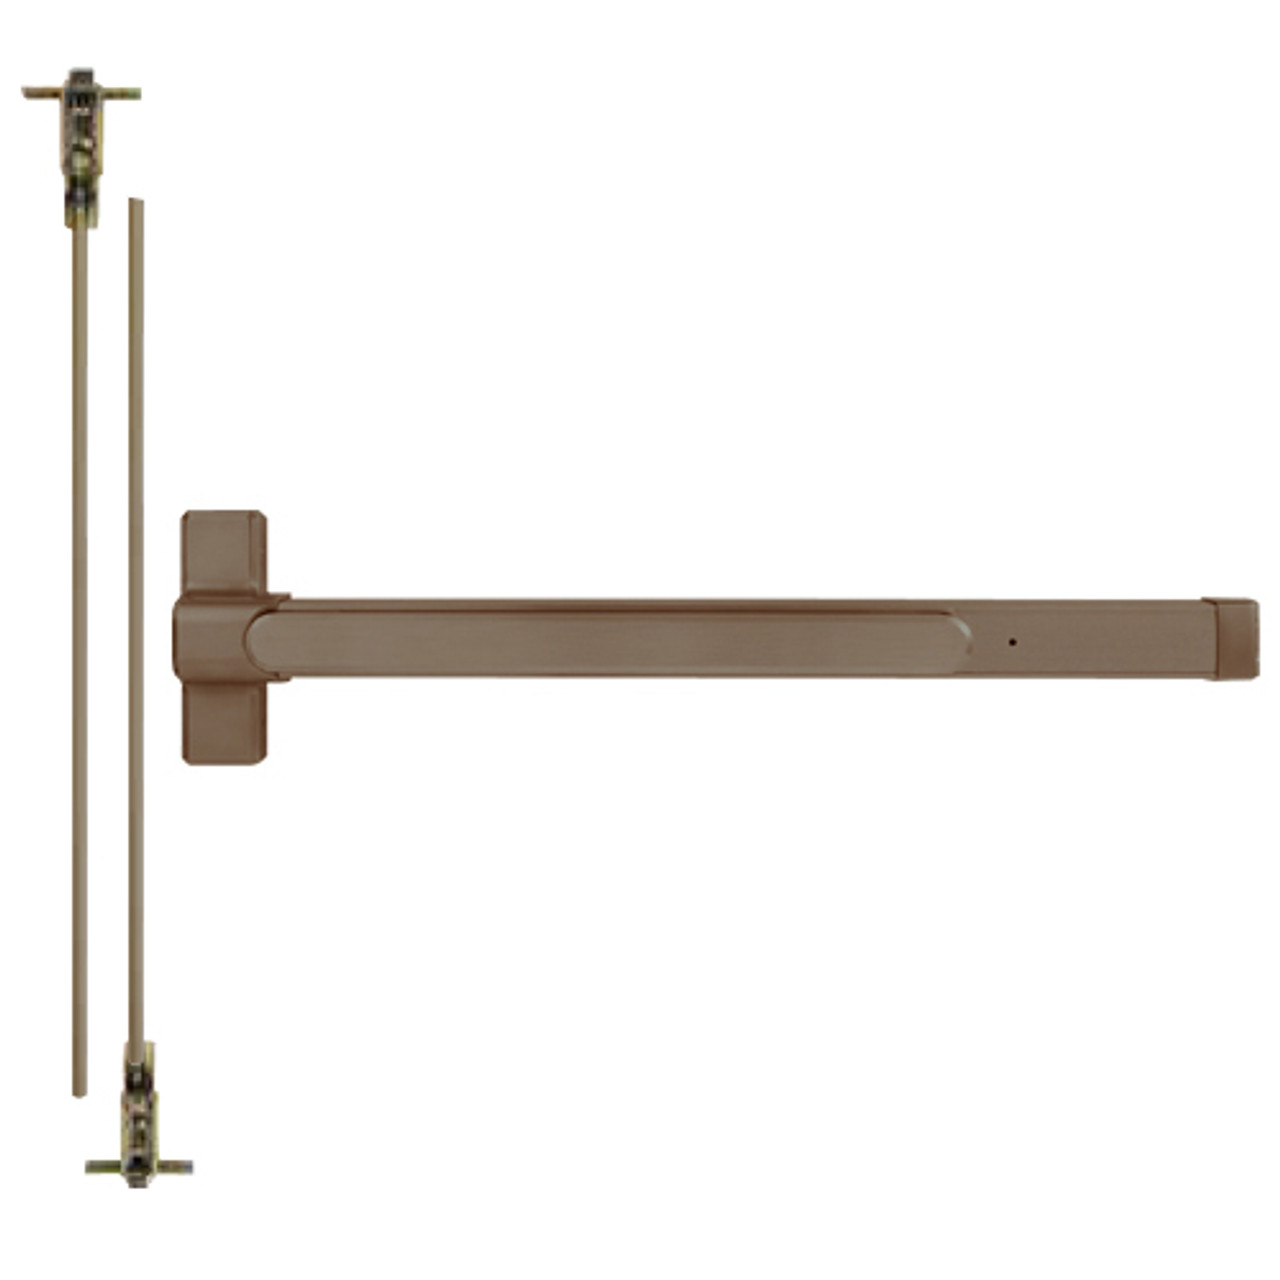 QED126LR-36-8-313AN Stanley QED100 Series Heavy Duty Concealed Vertical Rod Fire Rated Exit Device in Anodized Duranodic Bronze Finish